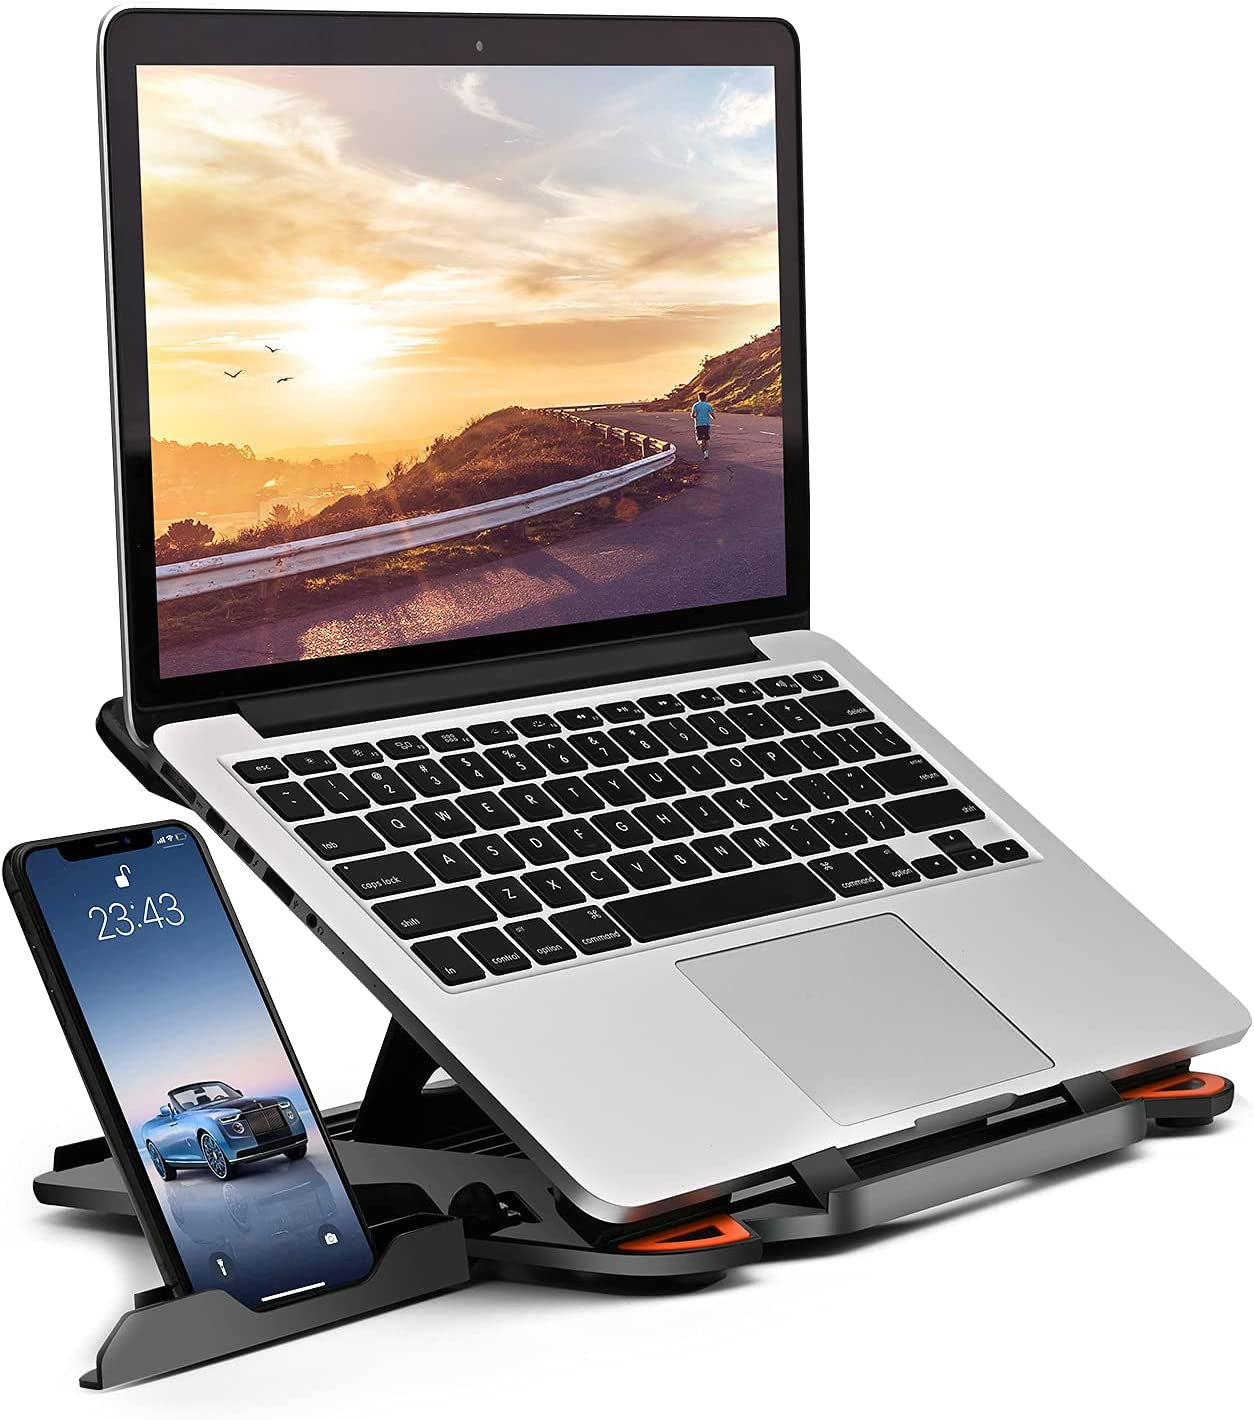 Adjustable Laptop Stand with Multi-Angle Functionality, Phone Stand, and Portable Foldable Design - Compatible with 10 to 17” Laptops